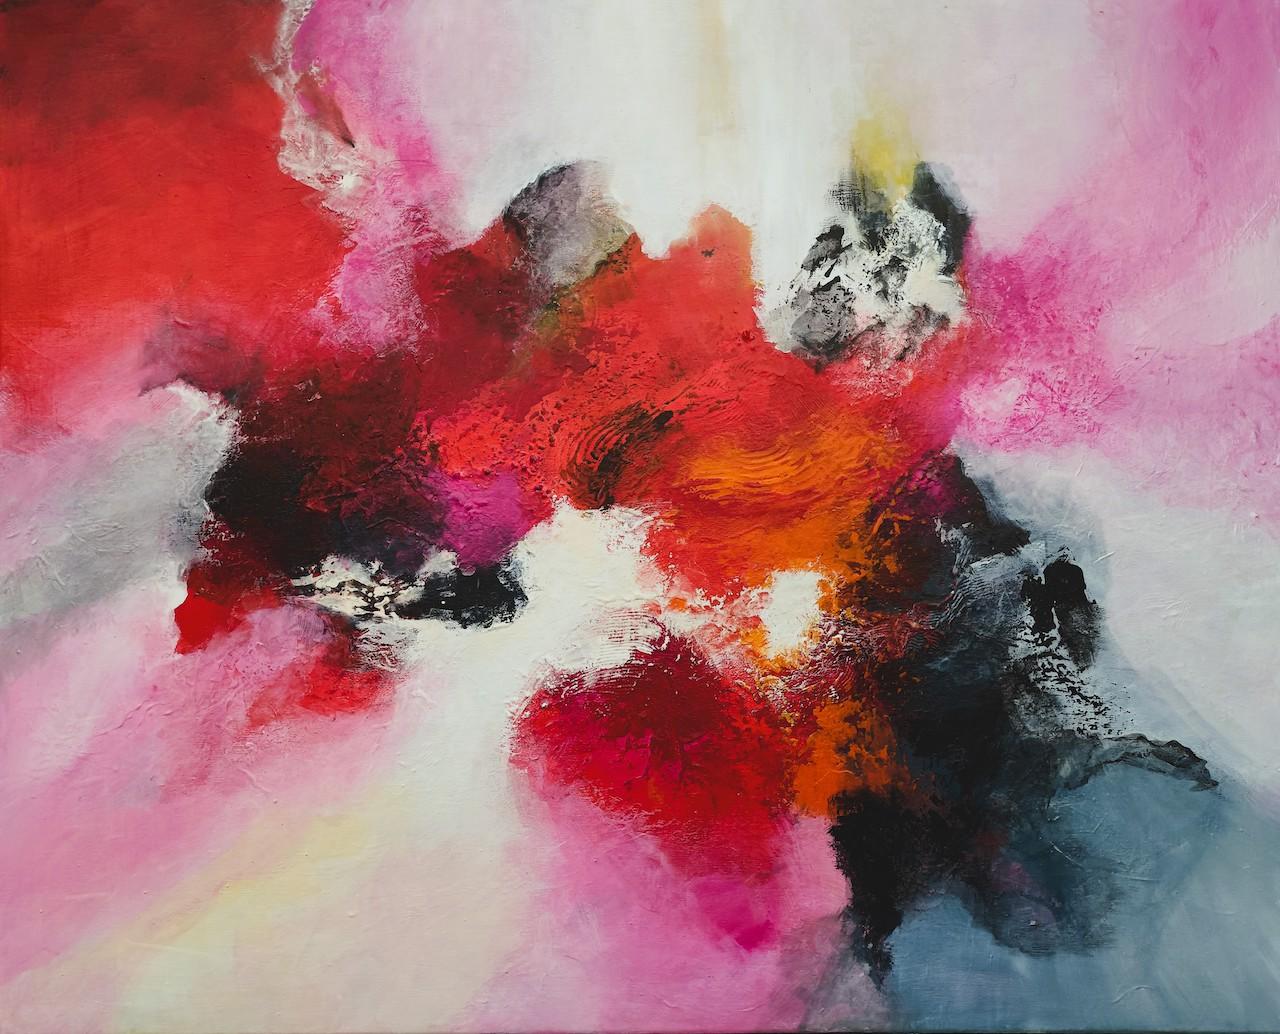 Acrylic on canvas

Christiane Hess (Chrystral) is a French abstract artist born in 1951 who lives and works in Lalinde, near Bergerac in France. Her conversion to abstract art gives her the feeling of enjoying unconstrained and limitless freedom of